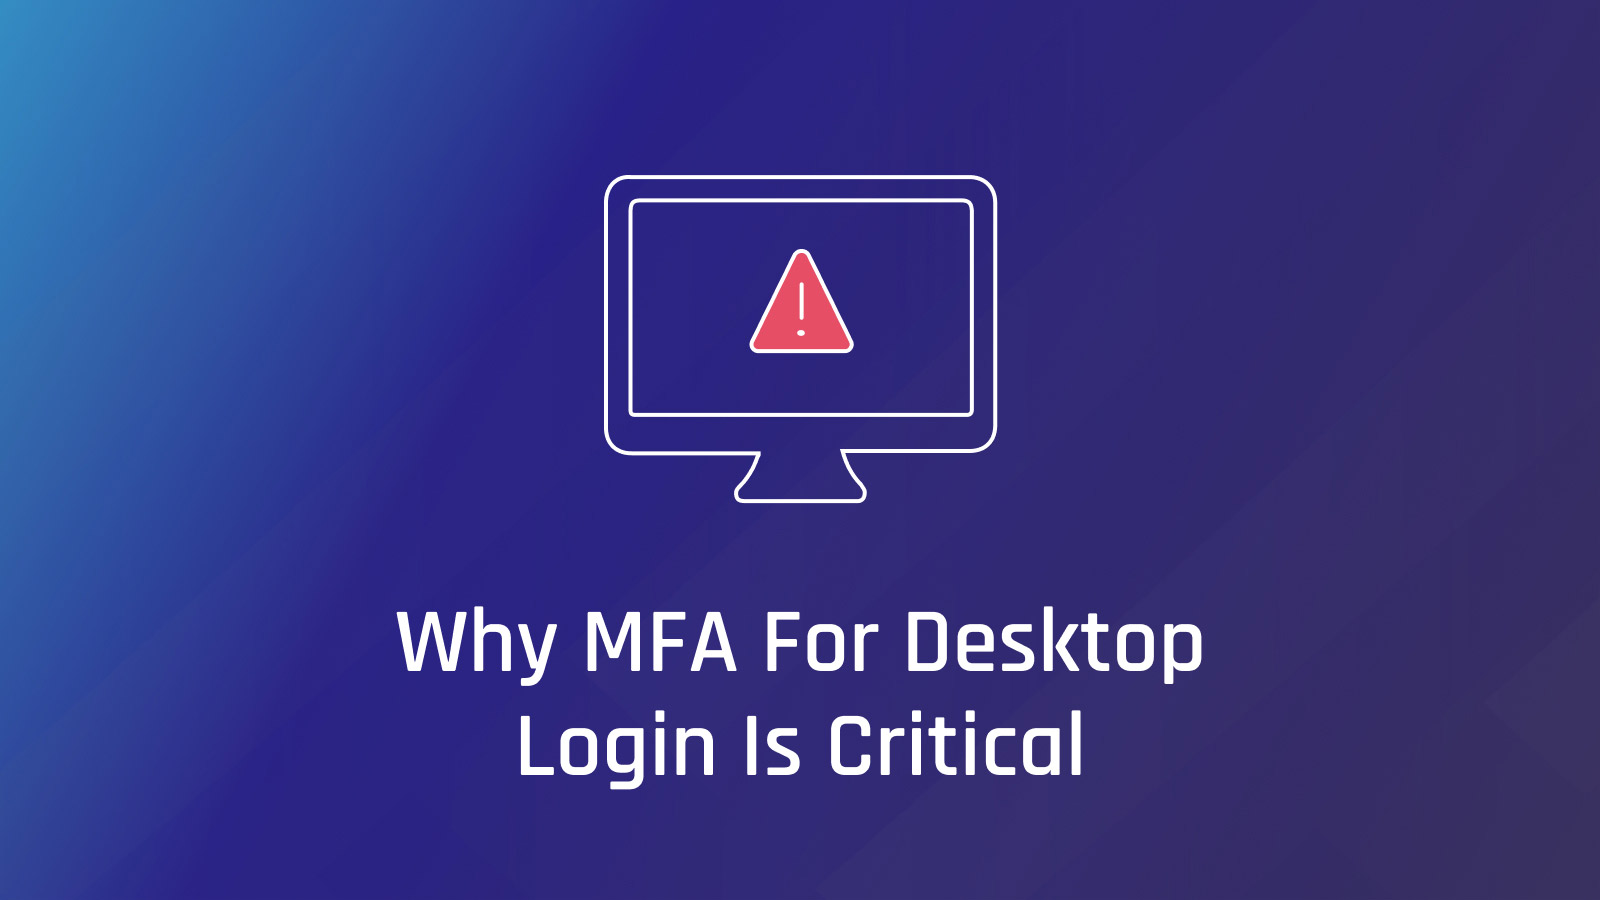 Why MFA for Desktop Is Critical for Organizational Security